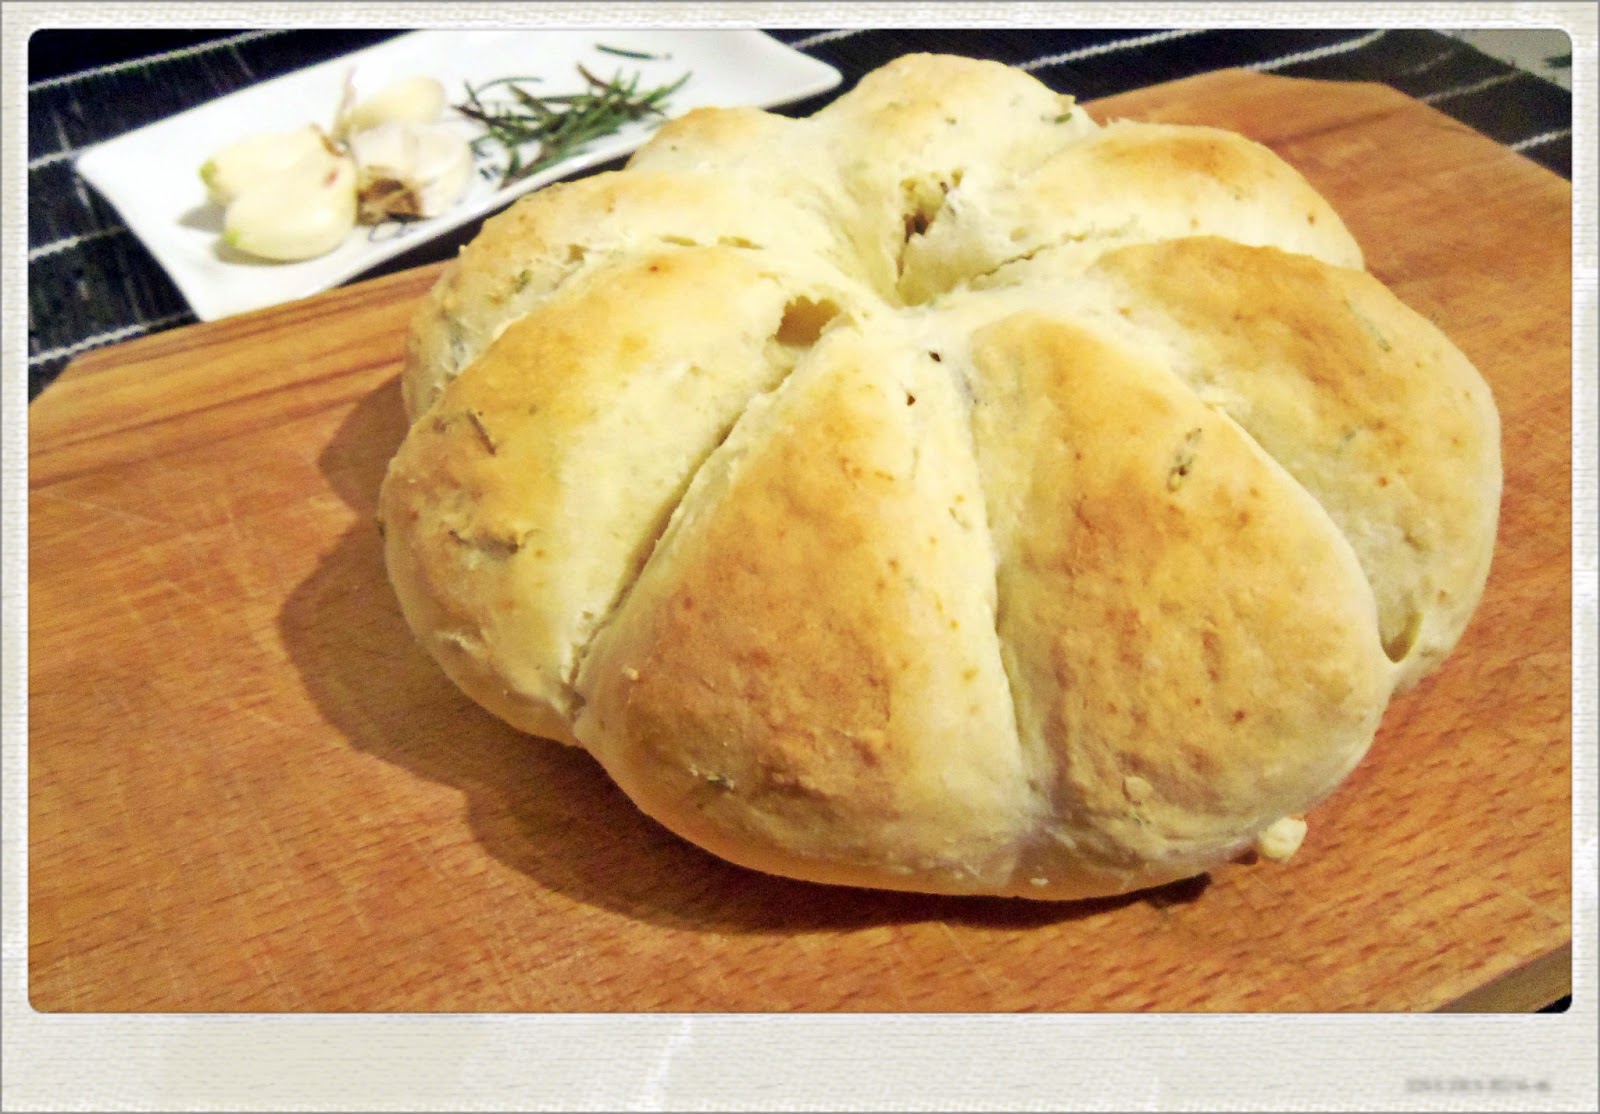 You&amp;#39;ve Got Meal!: Australian Damper Bread- No yeast required